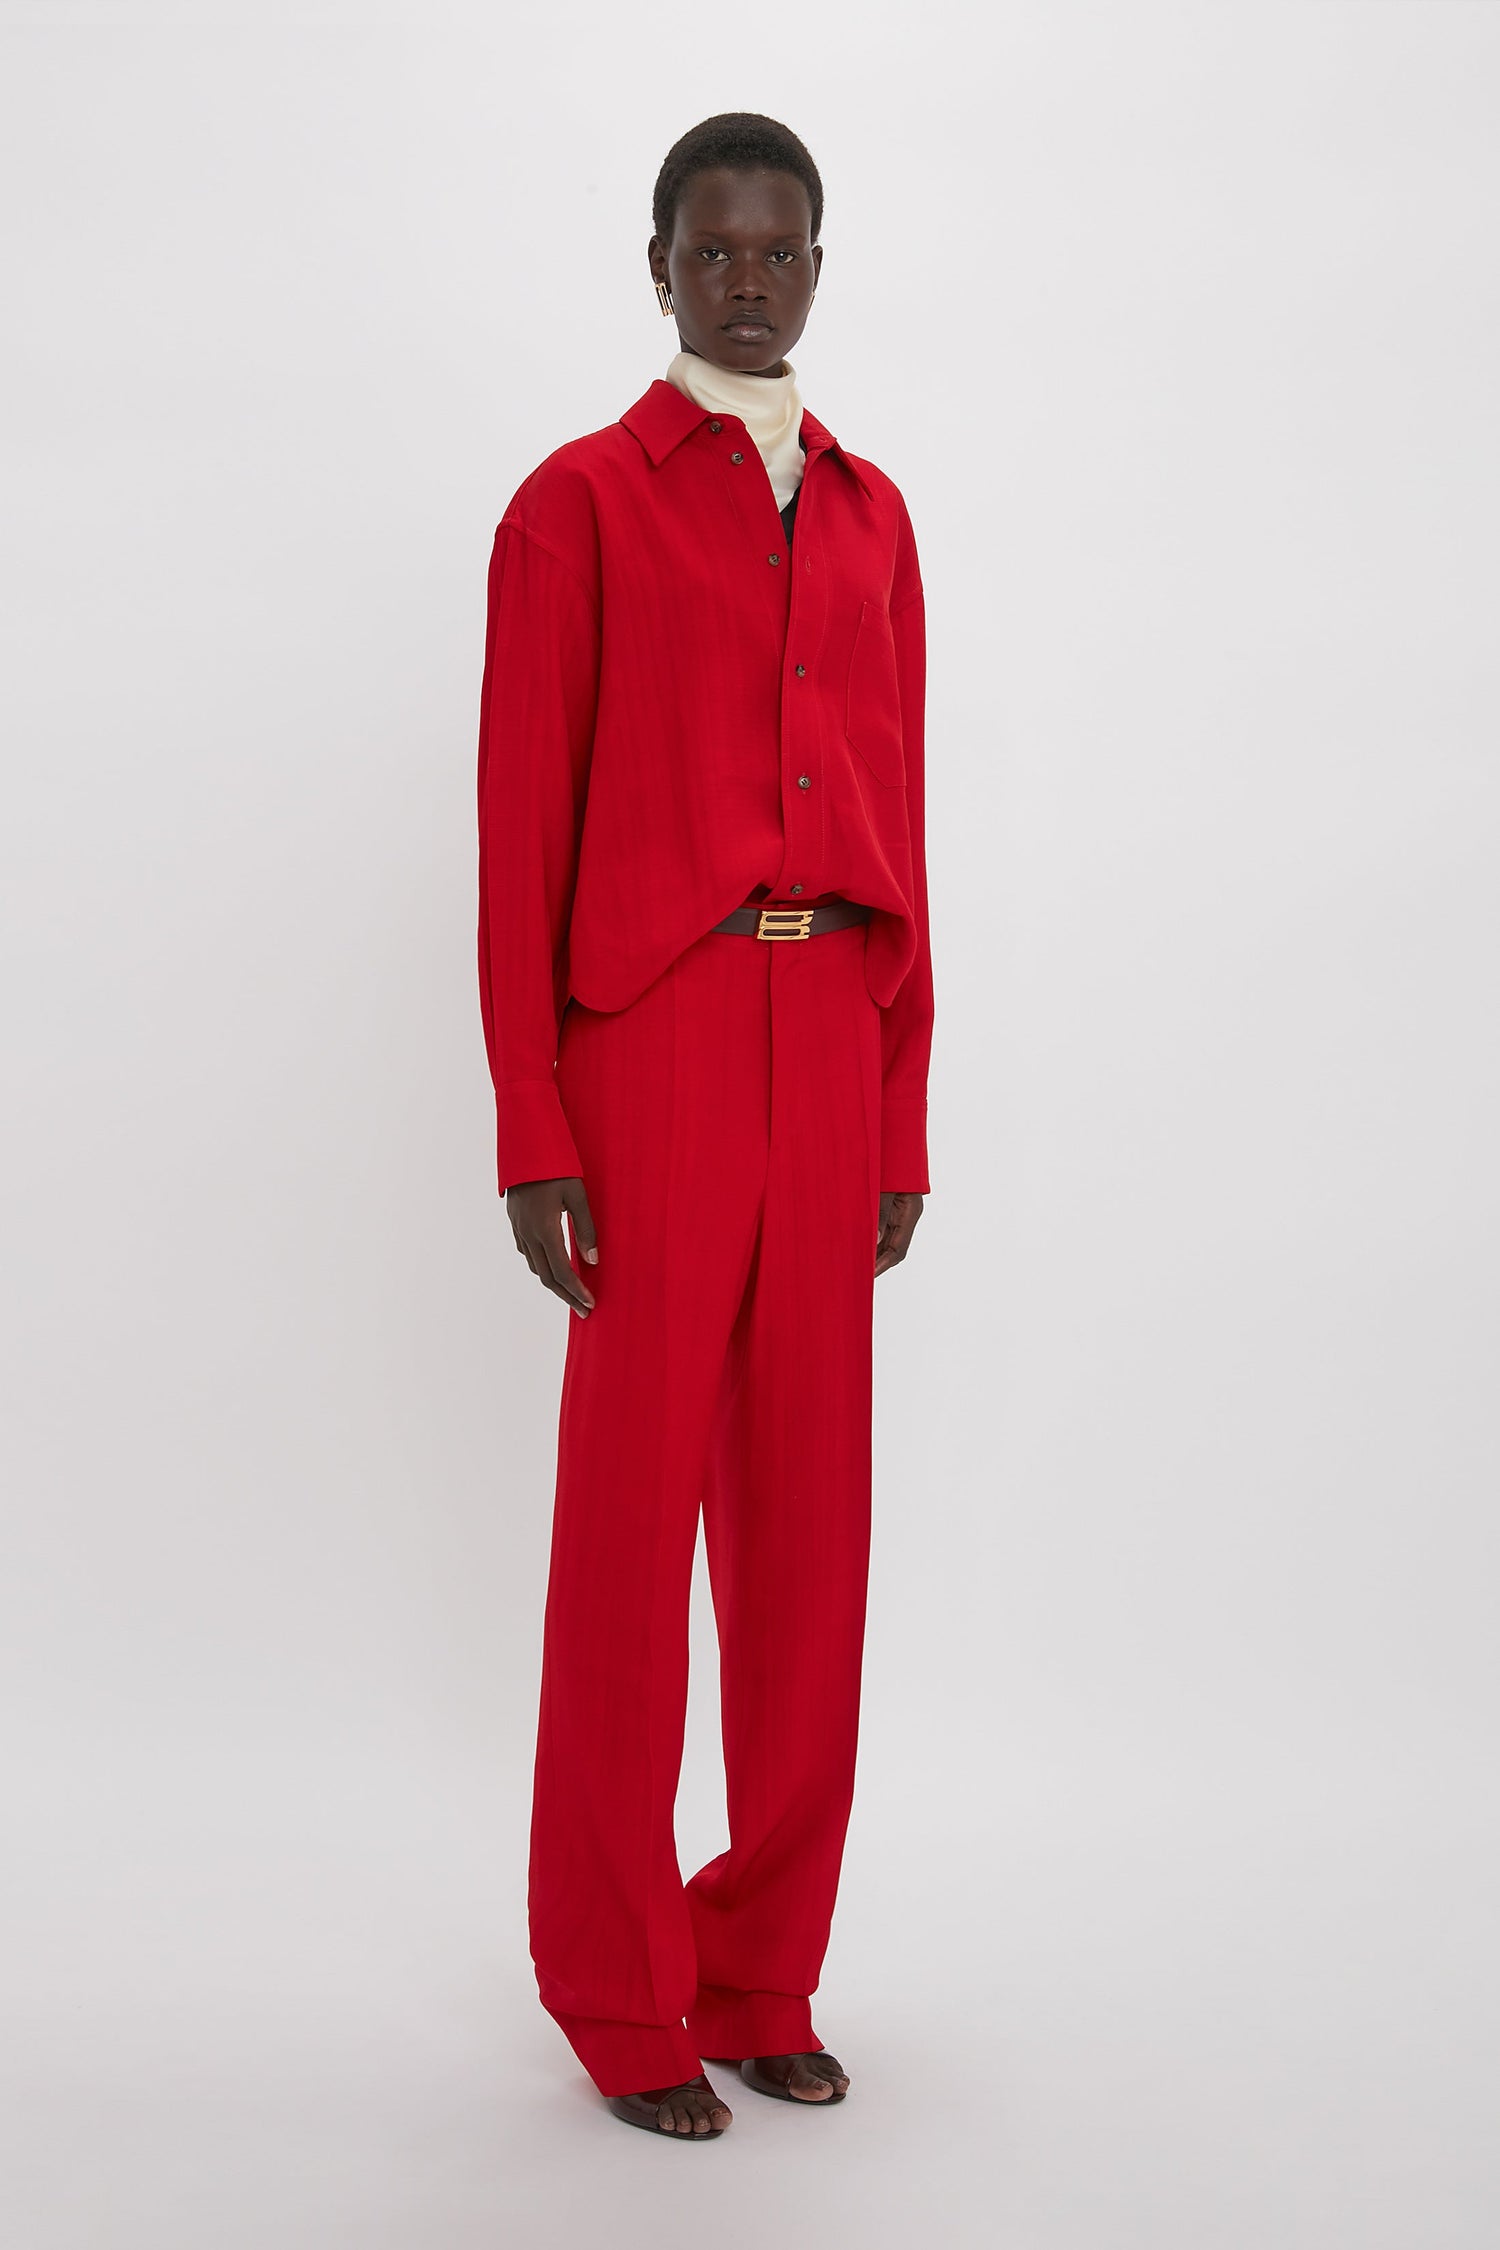 A person wearing a red shirt and matching Victoria Beckham Tapered Leg Trouser In Carmine stands against a plain white background, showcasing a lean silhouette that speaks to traditional tailoring.